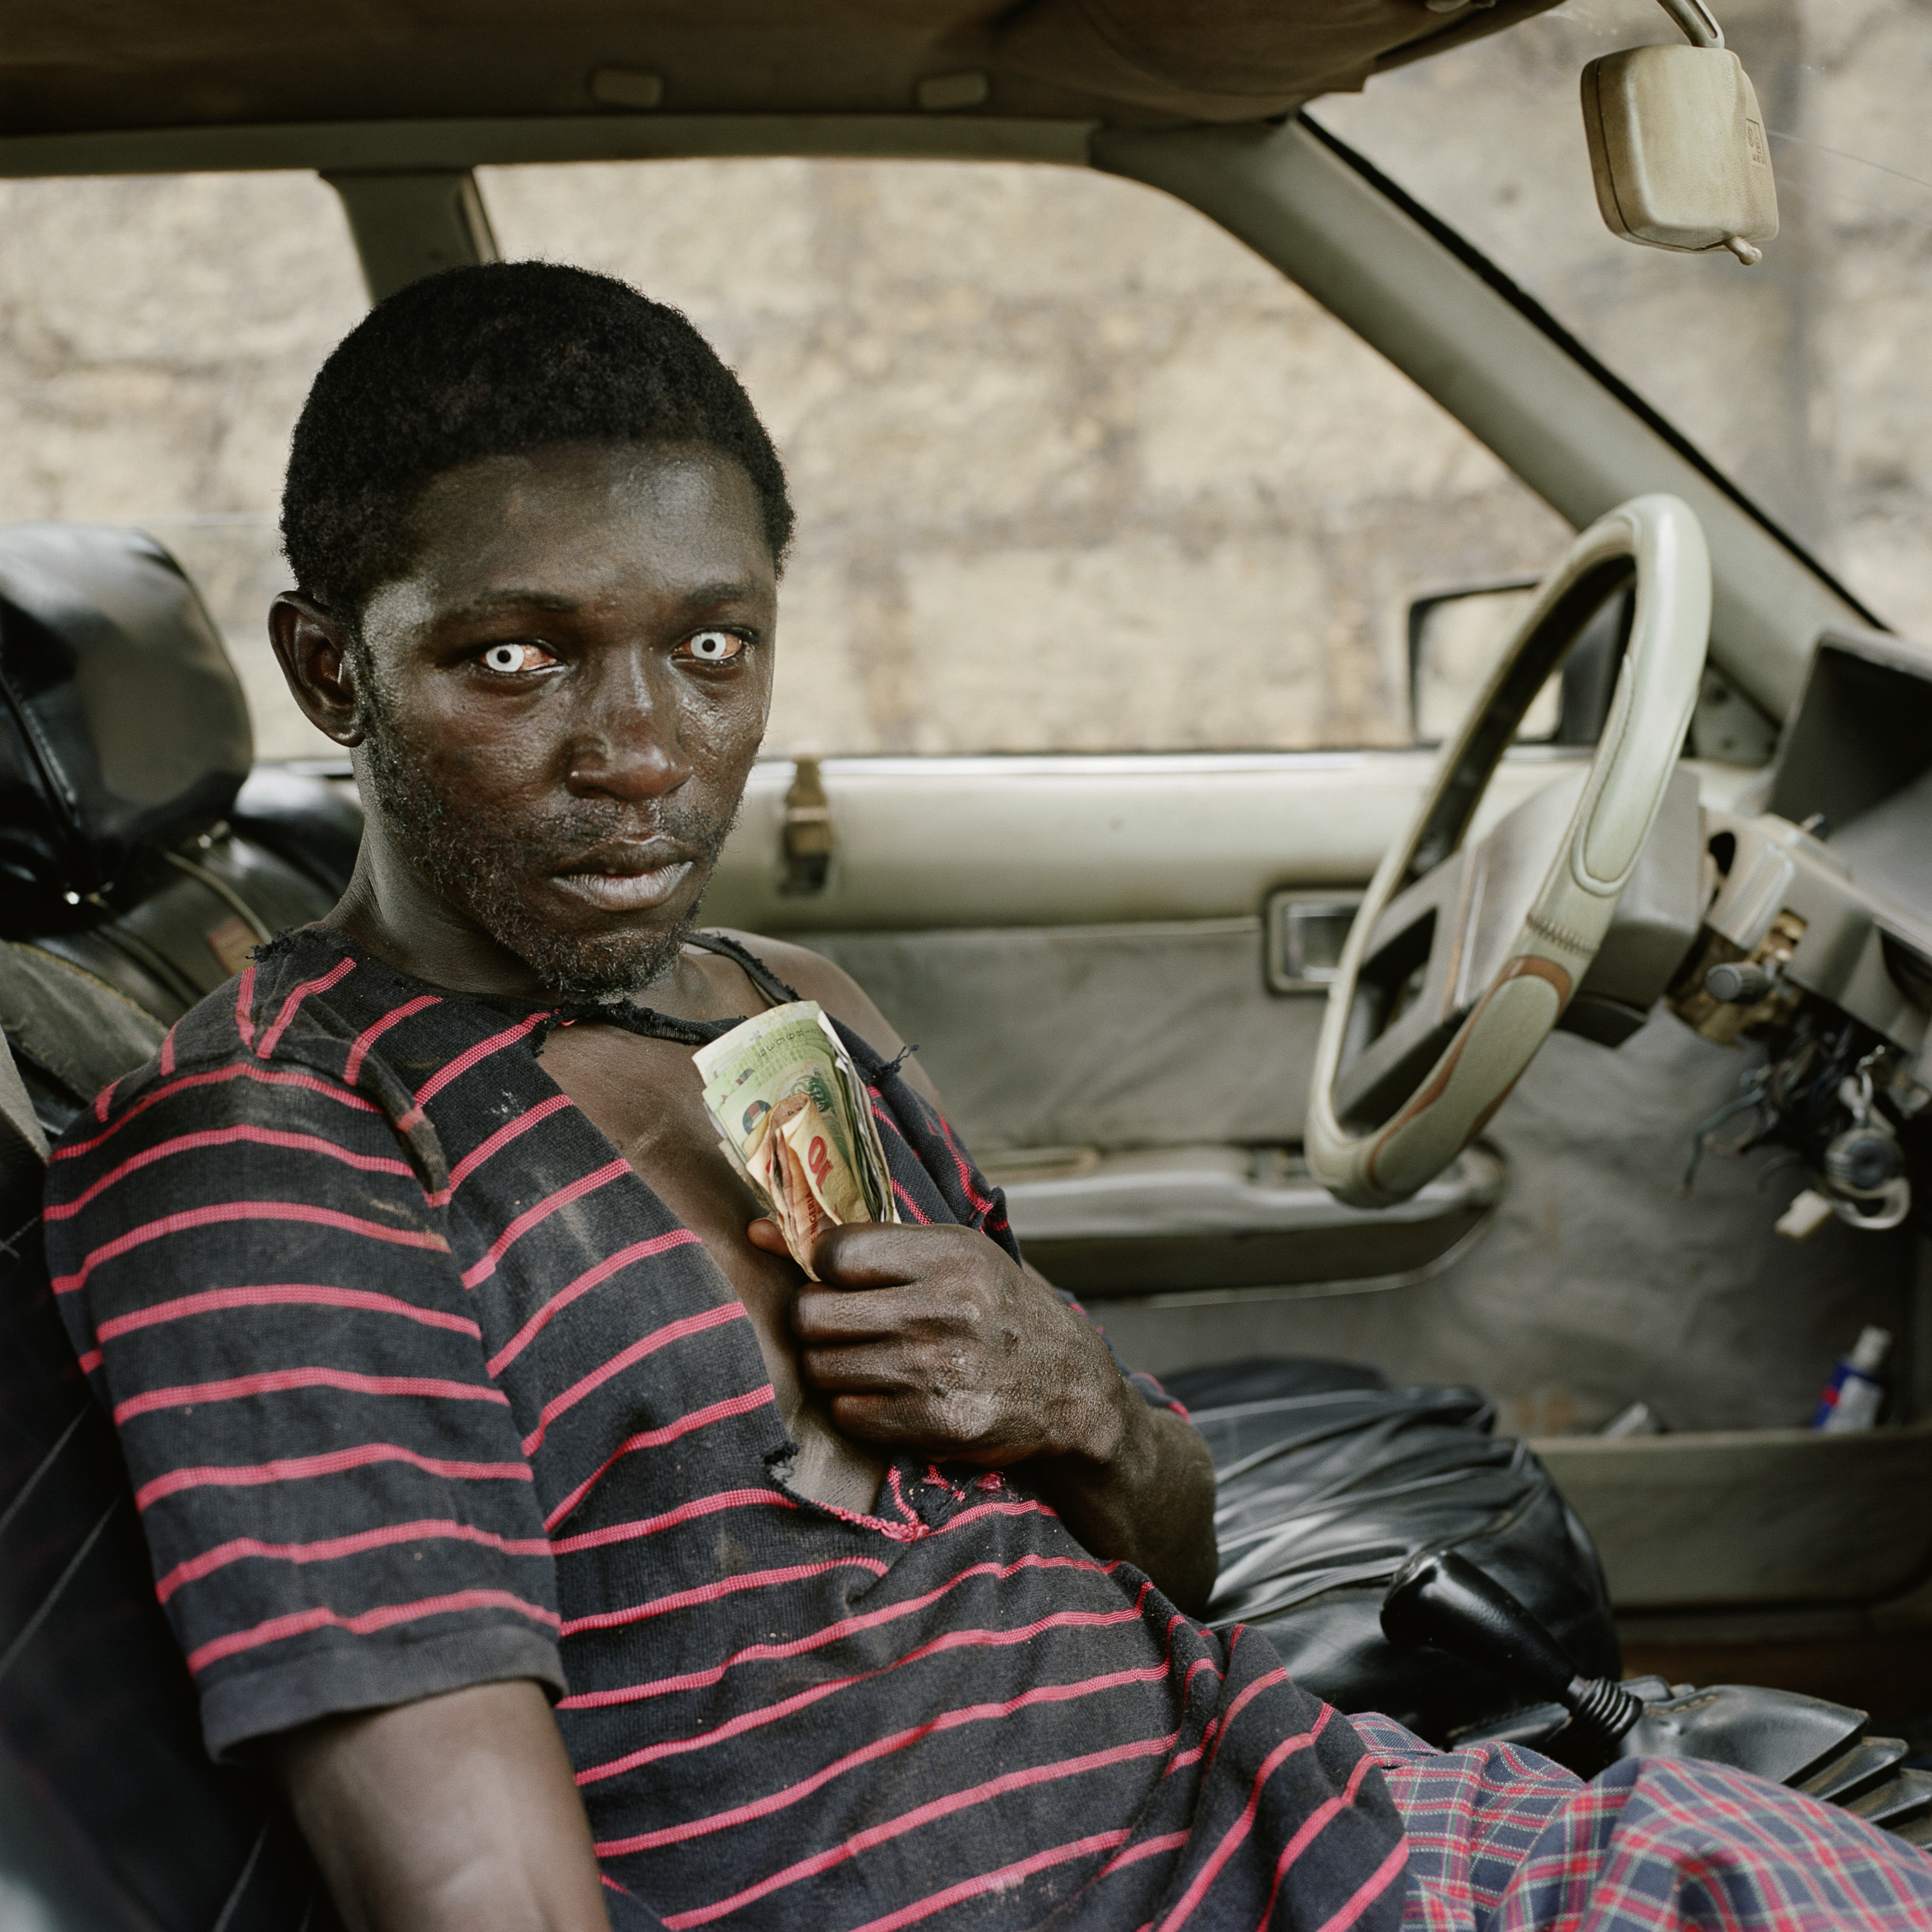 Revisiting Pieter Hugo’s Alluringly Haunting 2008 “Nollywood” Series￼